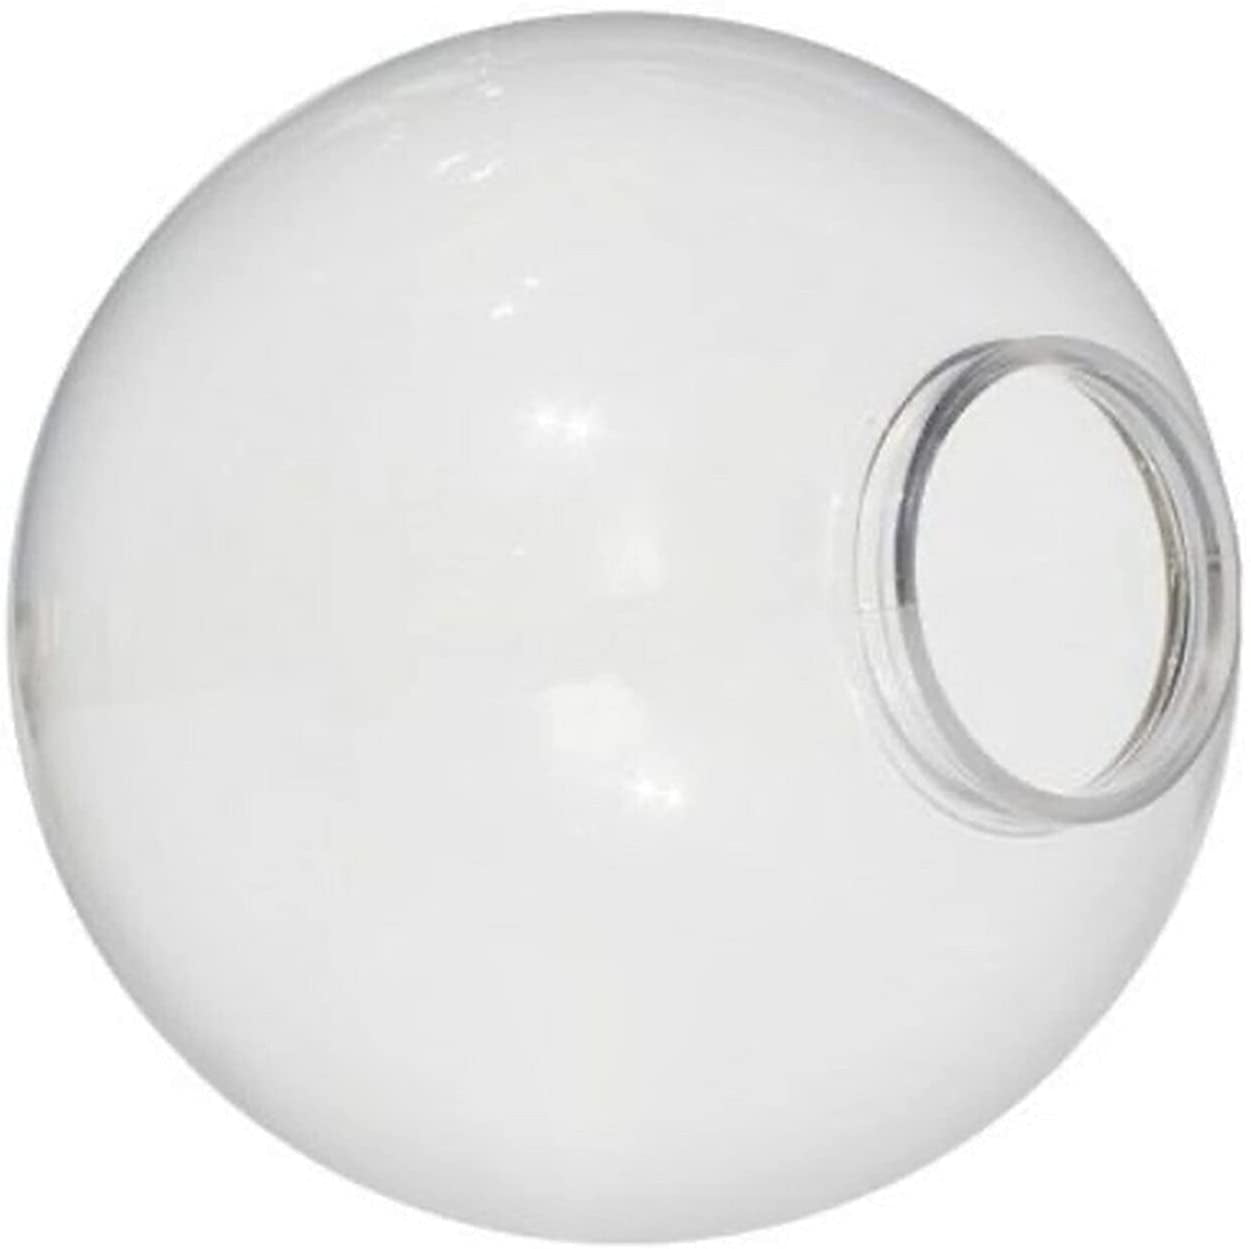 KastLite 12 Smoke Acrylic Lamp Post Globe Smooth Textured with 3.91 Fitter Neck Manufactured in the USA 